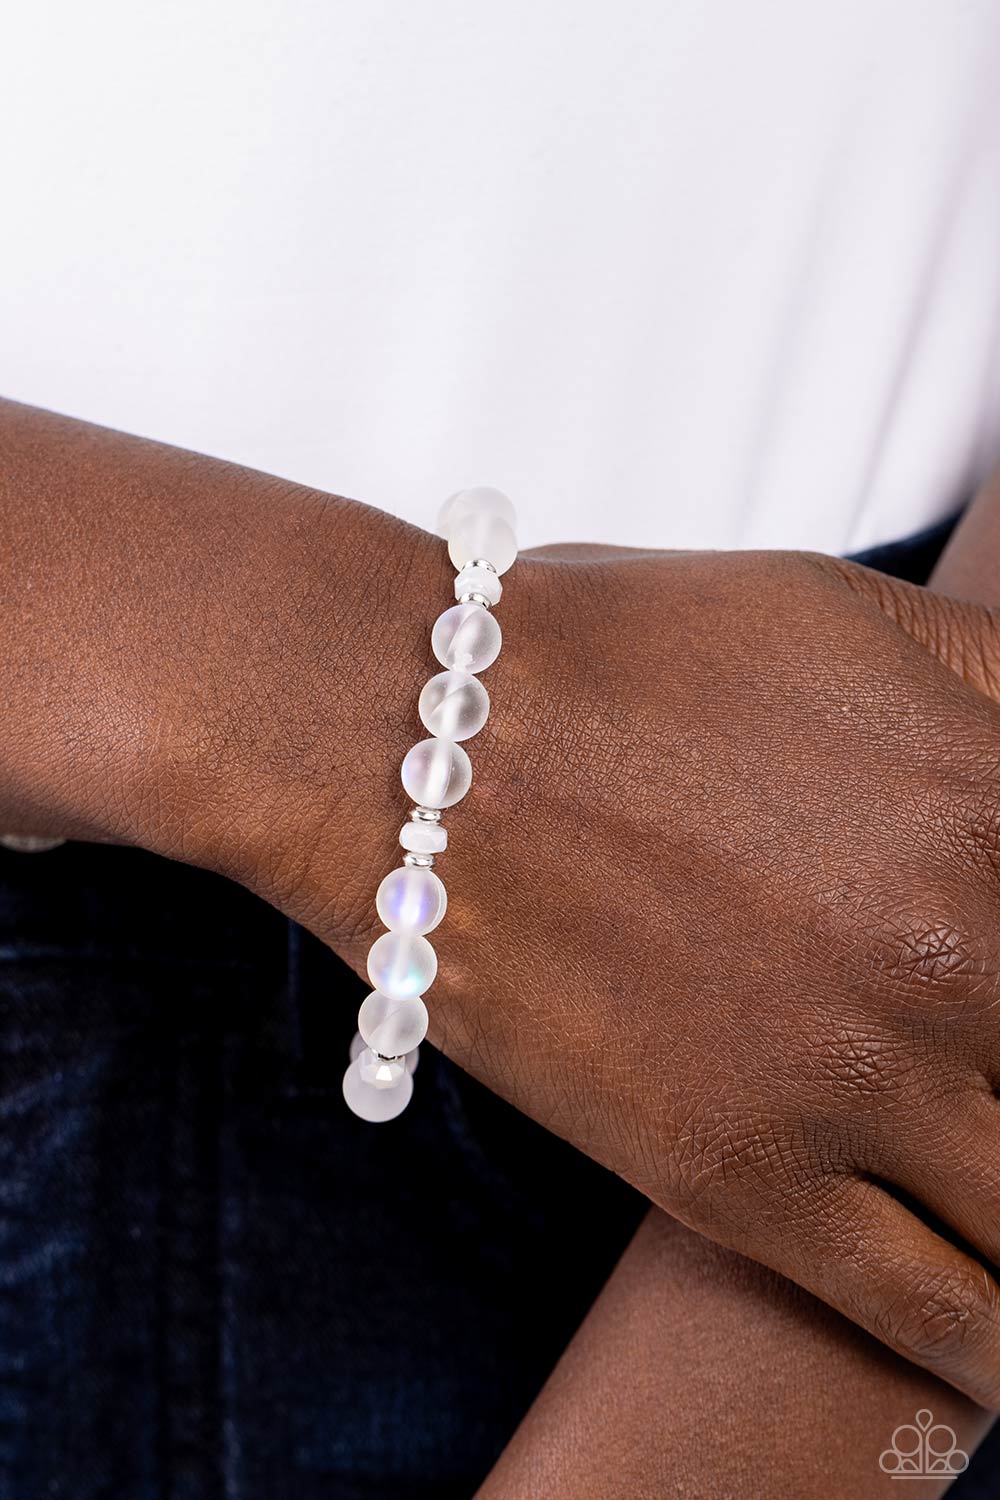 Mermaid Mirage White Bracelet - Paparazzi Accessories  Infused with silver accents and faceted white beads, a dreamy collection of frosted glassy white beads is threaded along a stretchy band around the wrist for an enchanting glow.  Sold as one individual bracelet.  P9SE-URWT-106XX